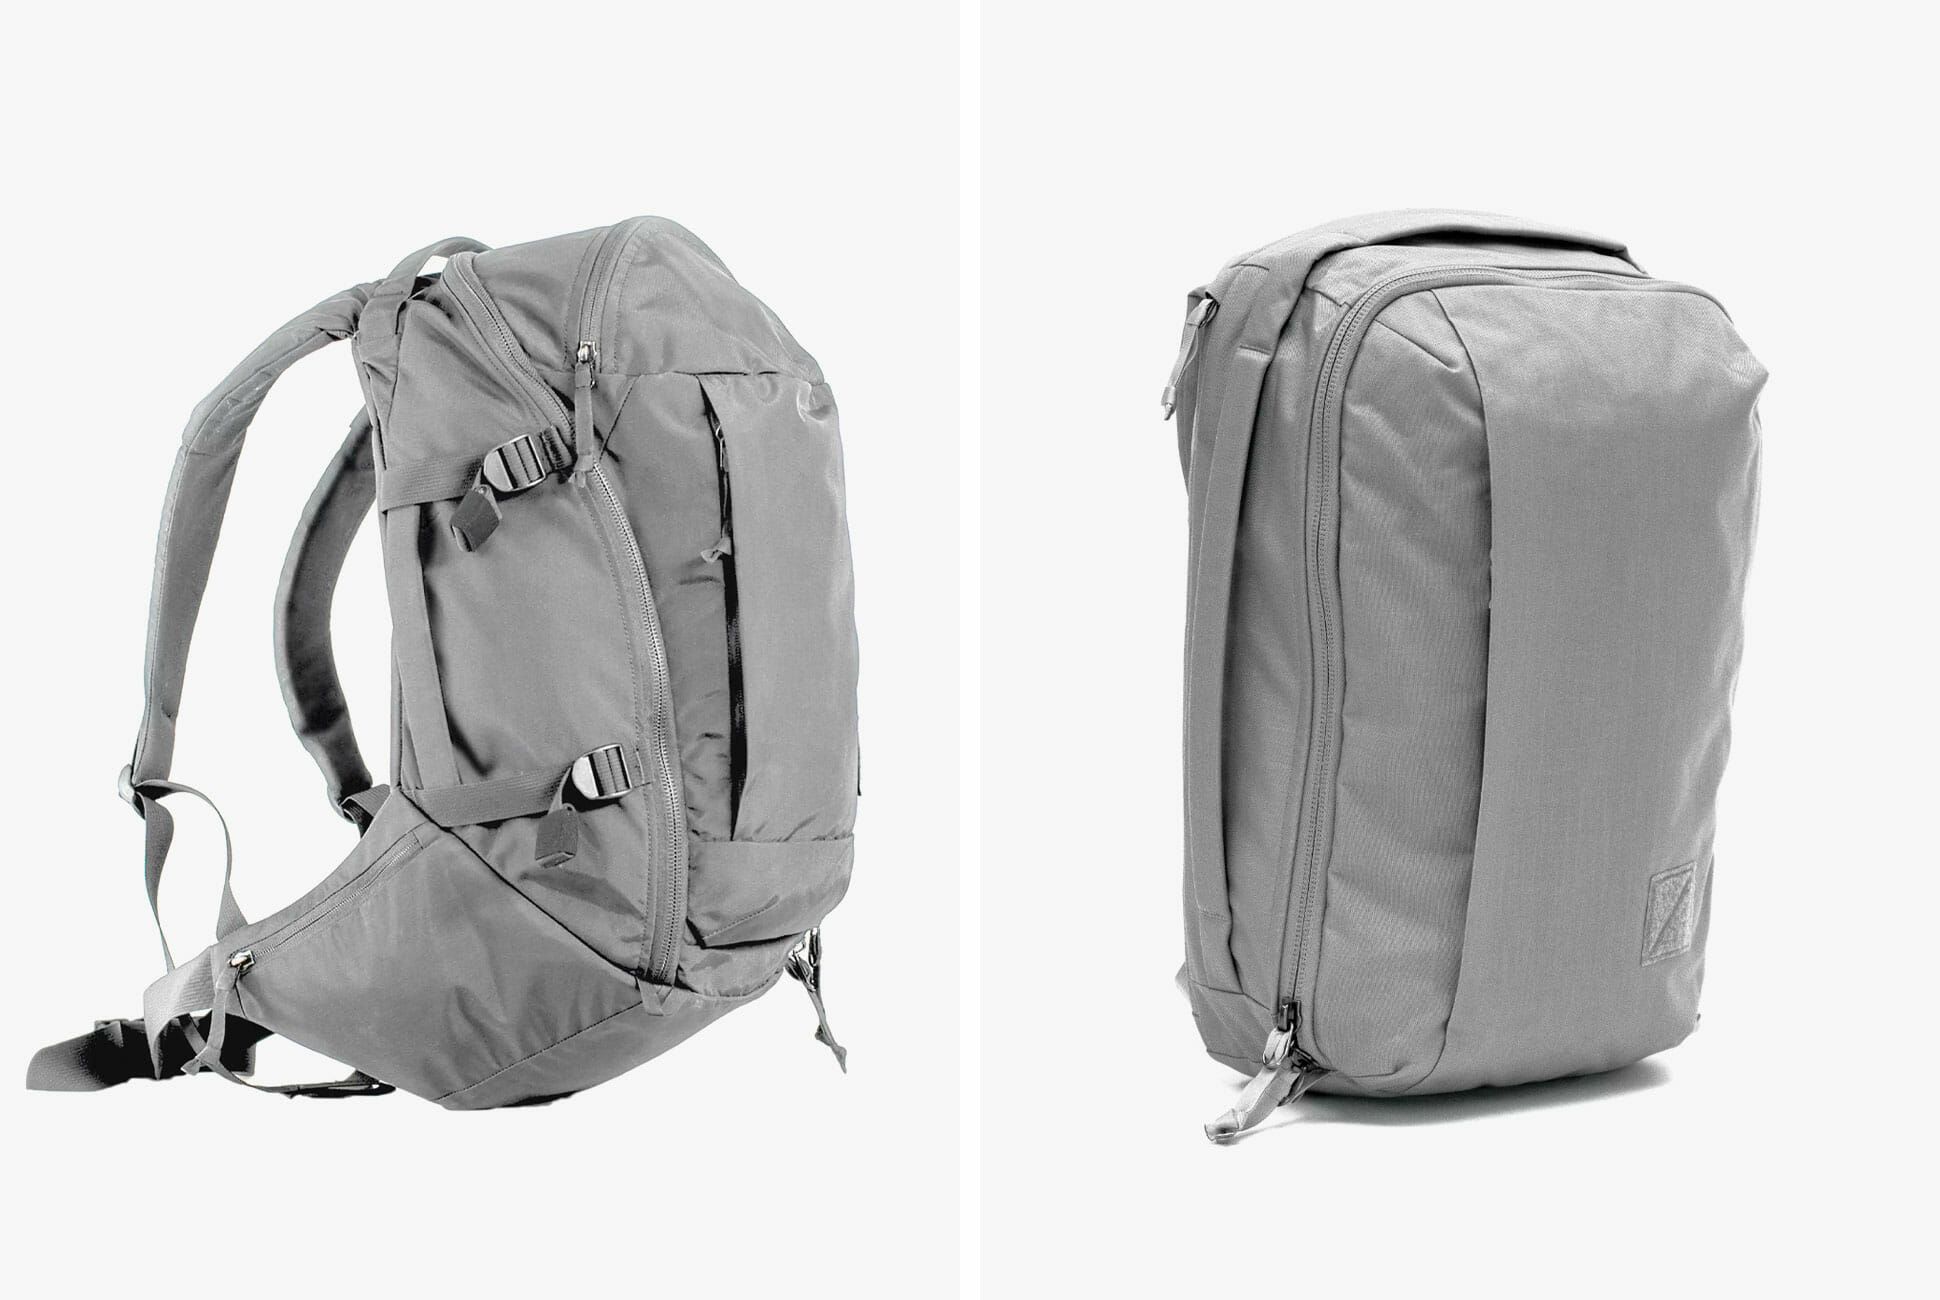 Need a New Backpack? Get One of These While They're on Sale